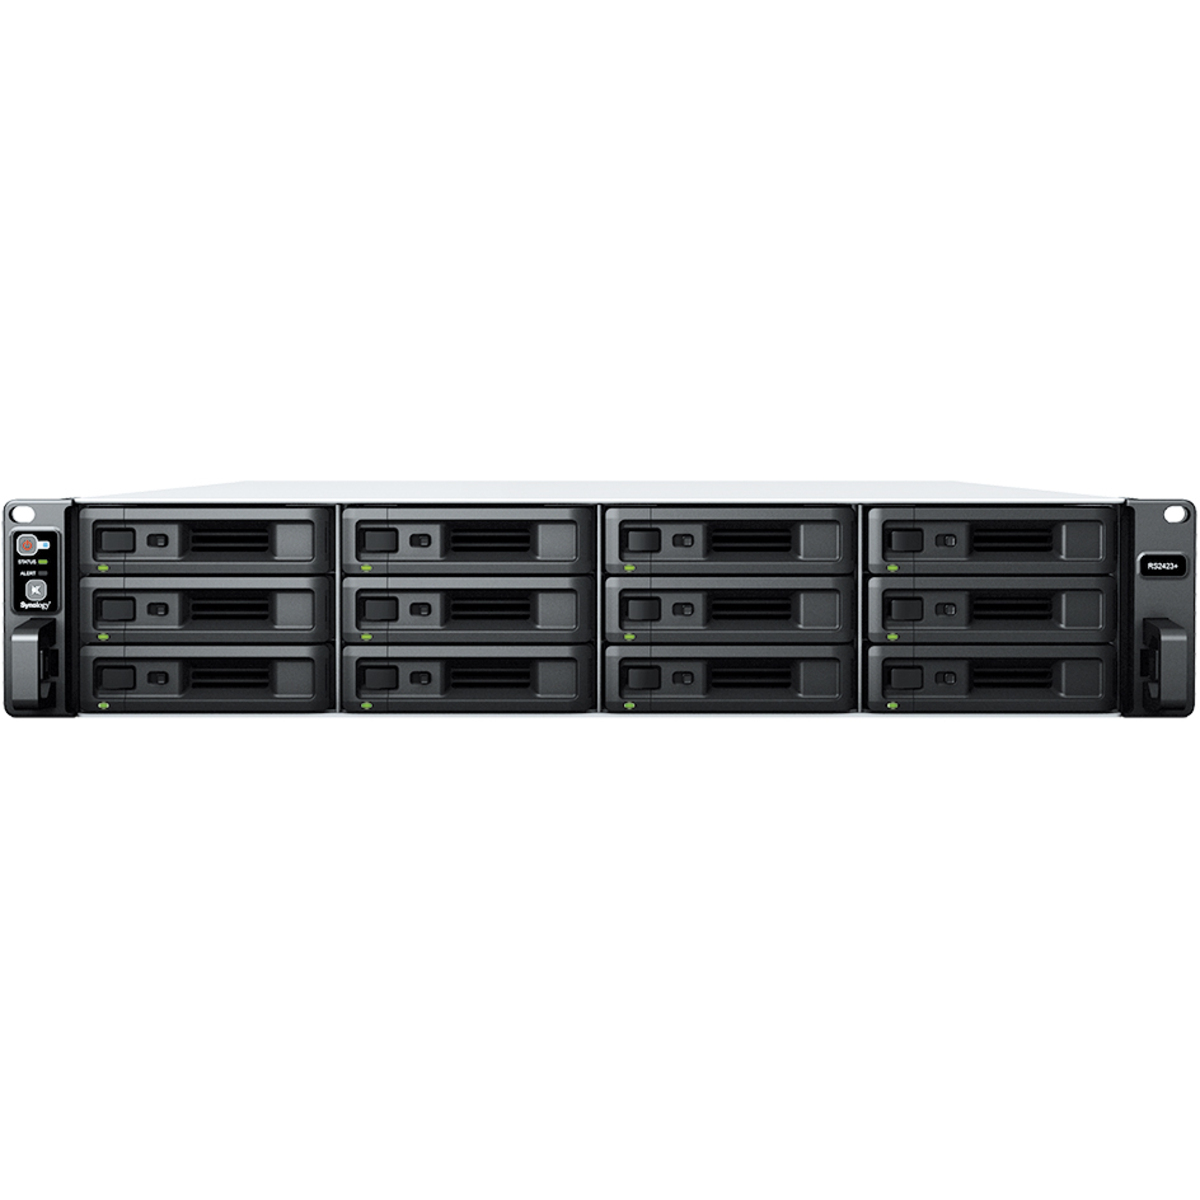 Synology RackStation RS2423+ 34.5tb 12-Bay RackMount Multimedia / Power User / Business NAS - Network Attached Storage Device 9x3.8tb Synology SAT5210 Series SAT5210-3840G 2.5 530/500MB/s SATA 6Gb/s SSD ENTERPRISE Class Drives Installed - Burn-In Tested RackStation RS2423+